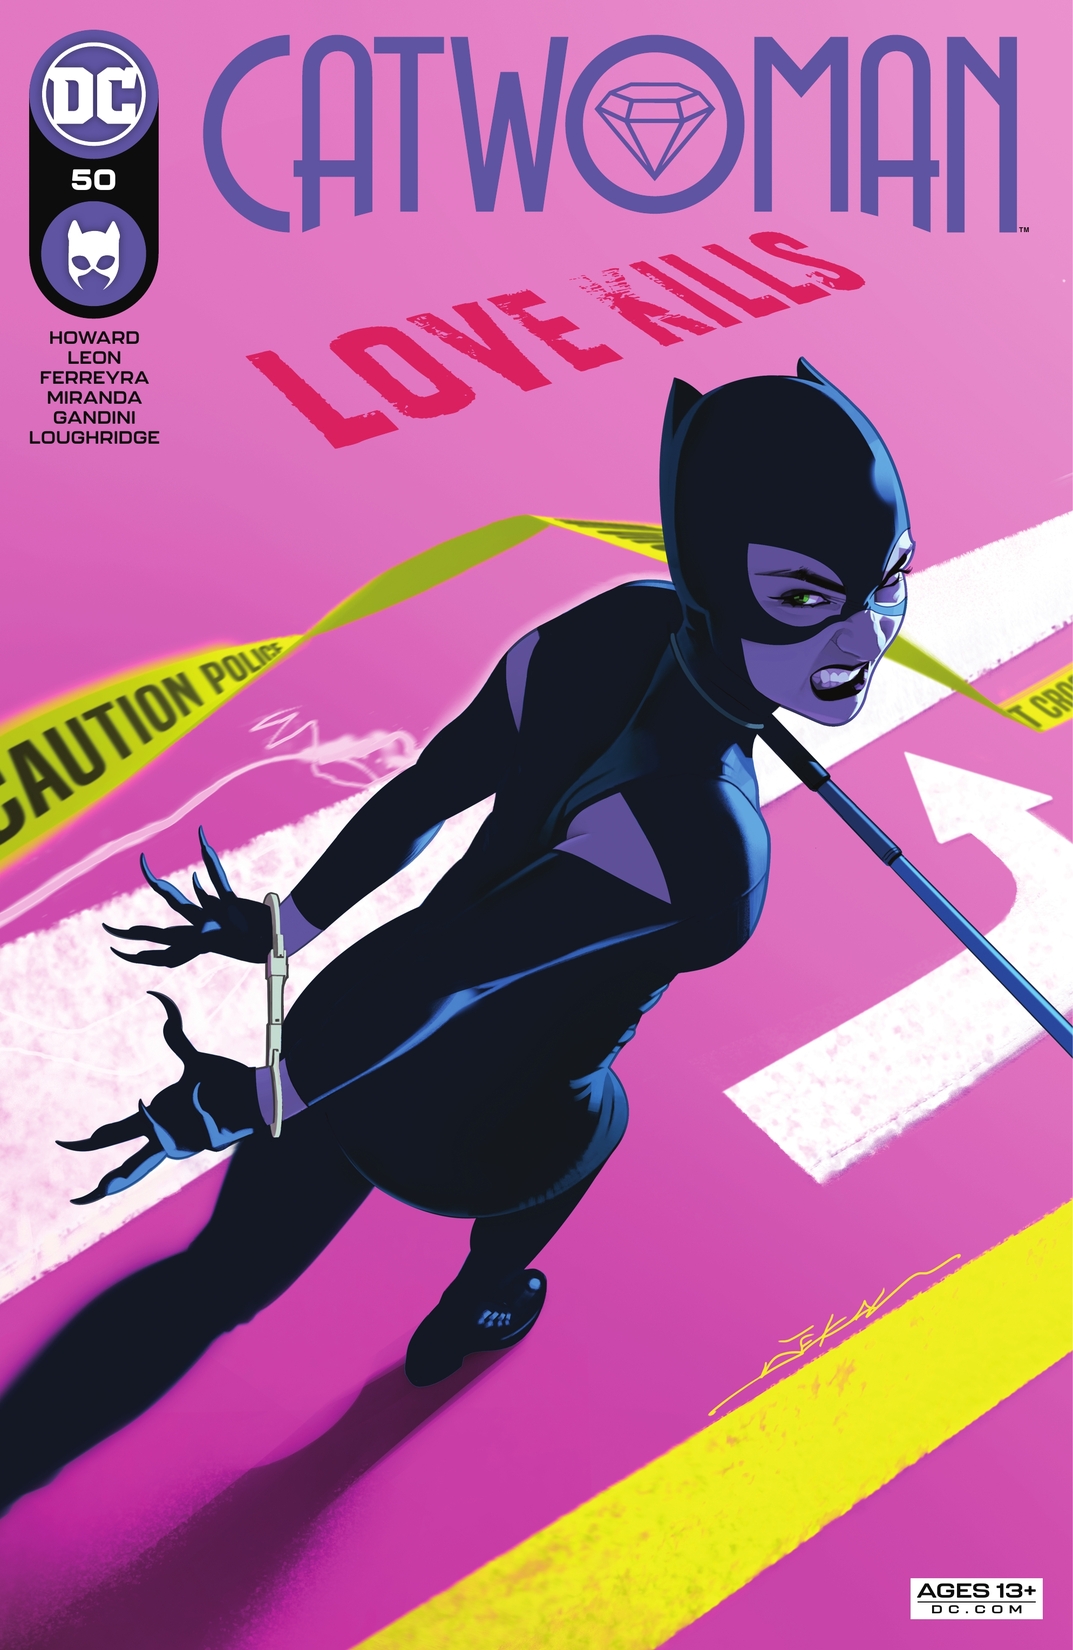 Catwoman (2018-) #50 preview images